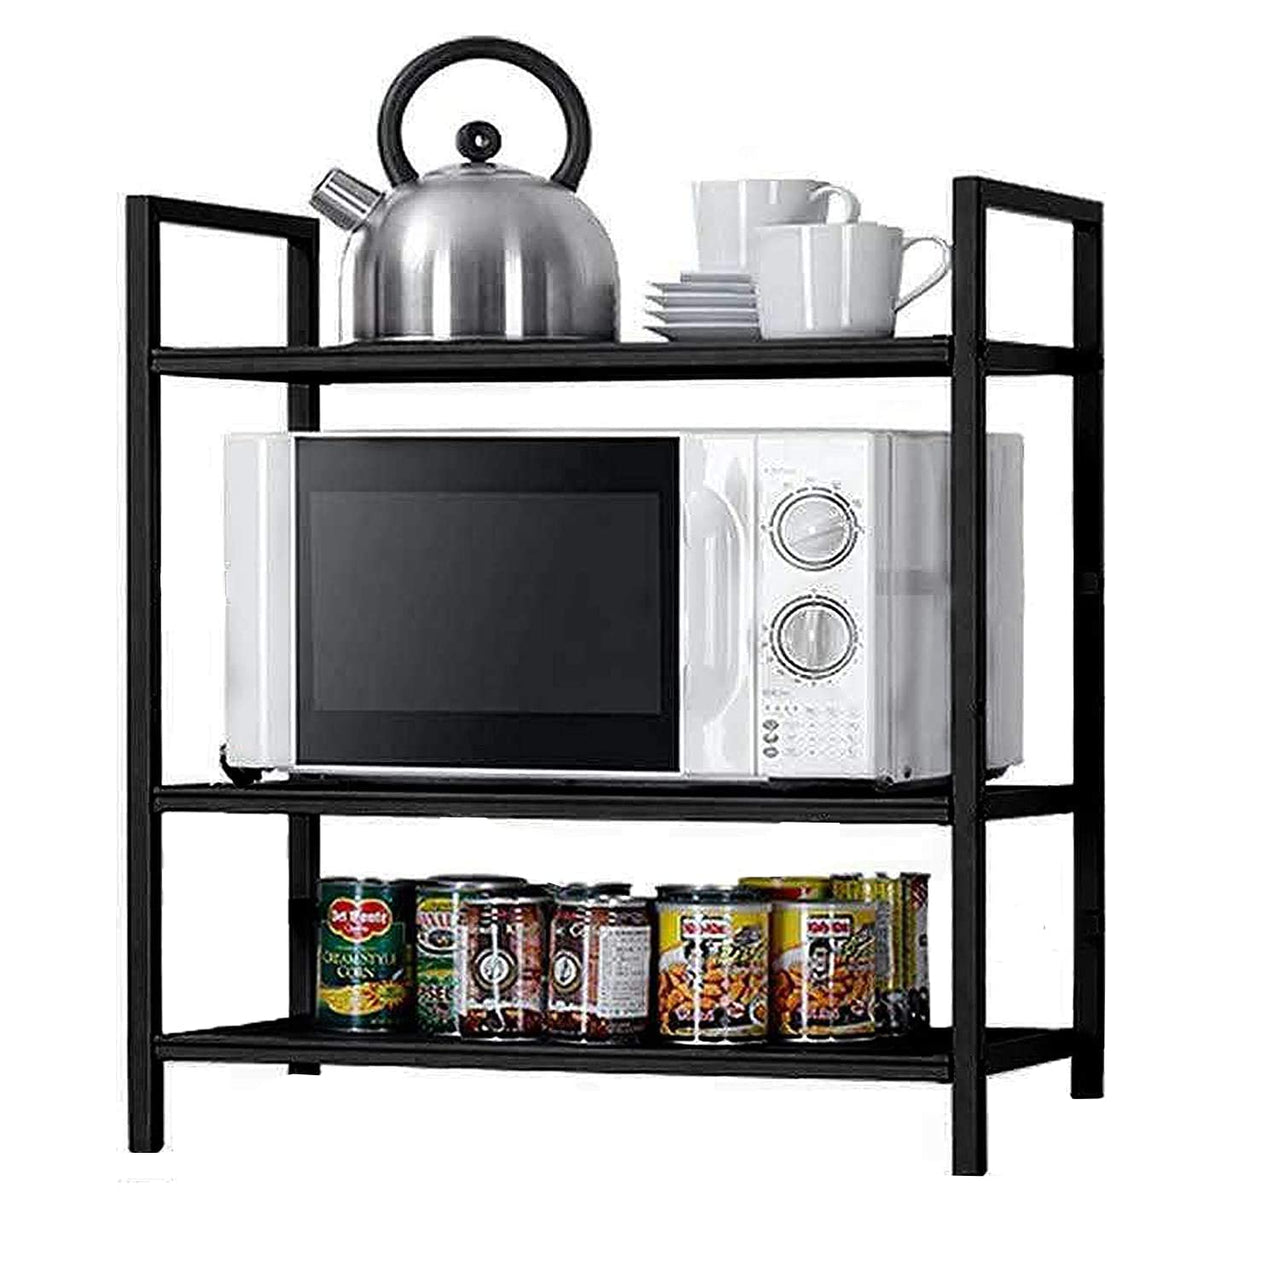 Dime Store Mircowave Stand/Oven Stand/Kitchen Rack/Kitchen Organizer/Spice Rack with Metal Frame and Wooden Shelves for Kitchen (3 Tier, Black) Dime Store